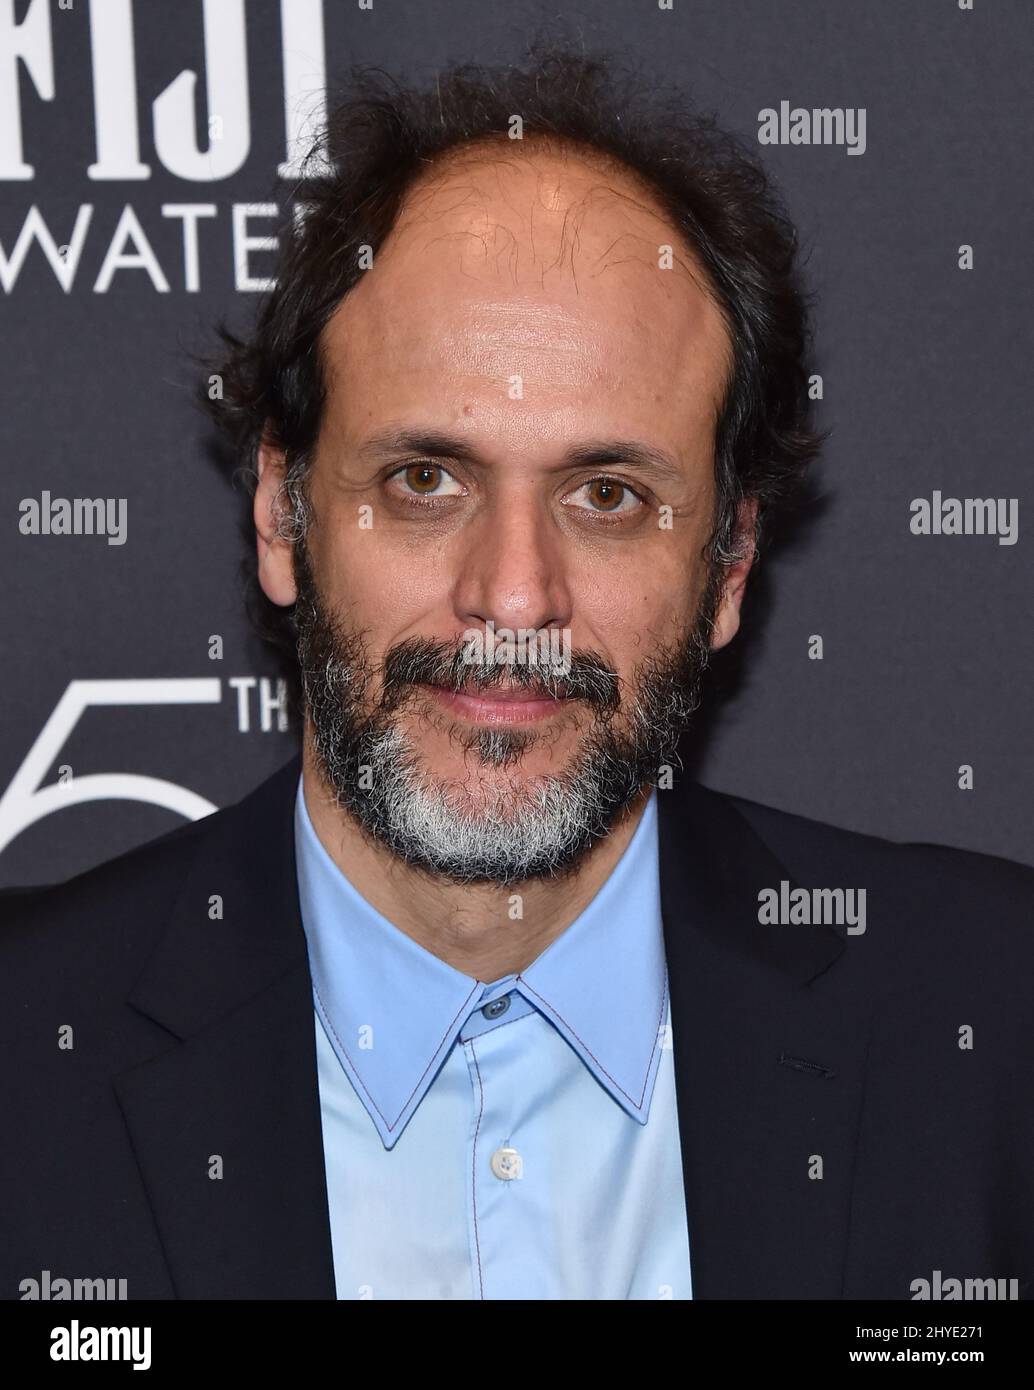 Luca Guadagnino at the Hollywood Foreign Press Association (HFPA) and InStyle celebrate the 75th Annual Golden Globe Awards season at CATCH LA on November 15, 2017 in West Hollywood, CA. Stock Photo